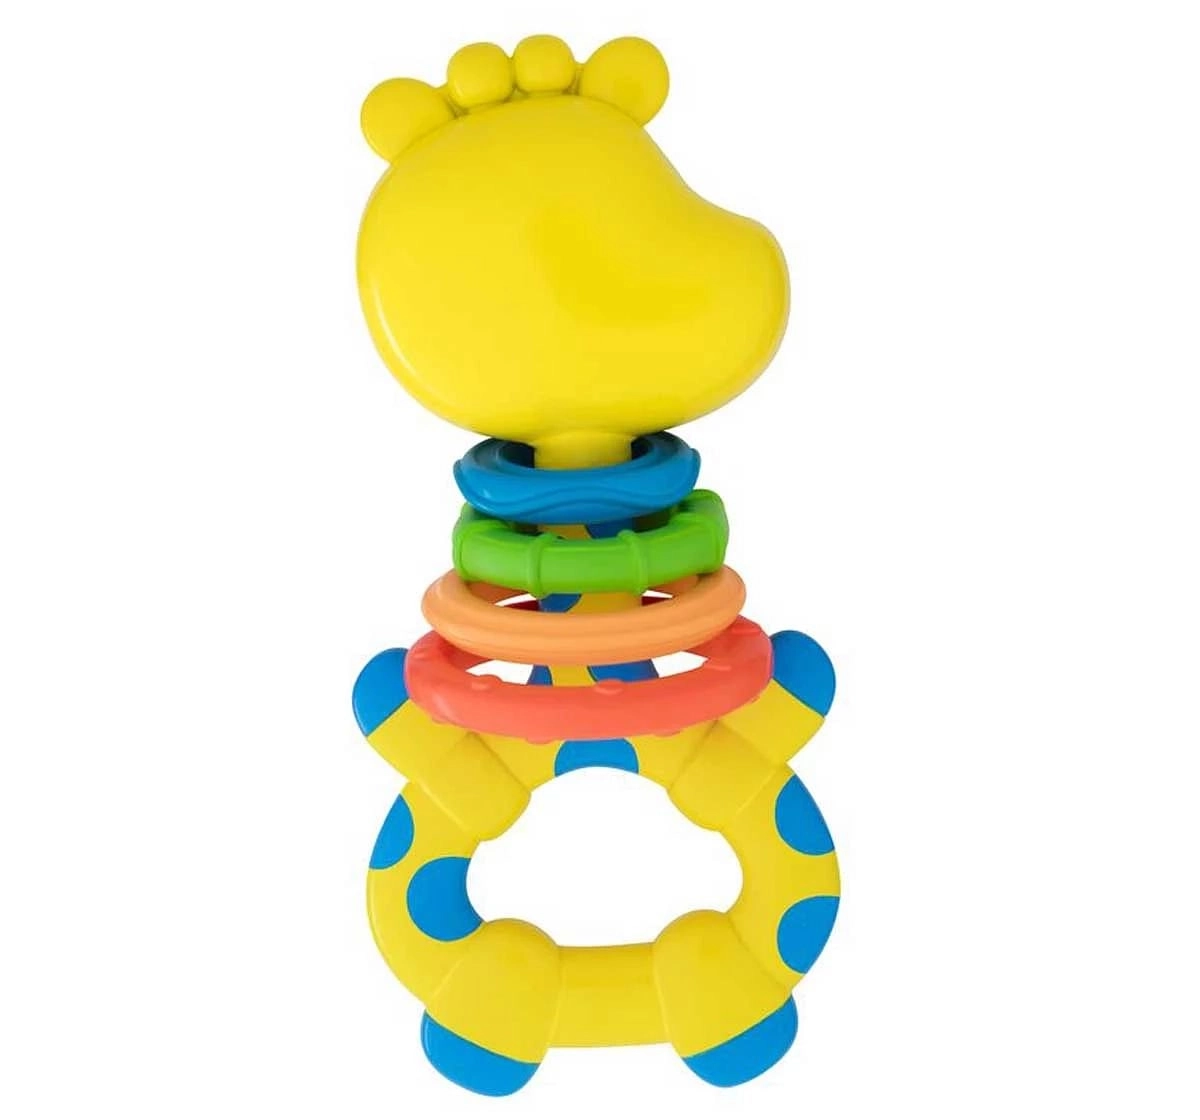 Chicco Gilby the Giraffe Rattle for Kids 3M+, Multicolour